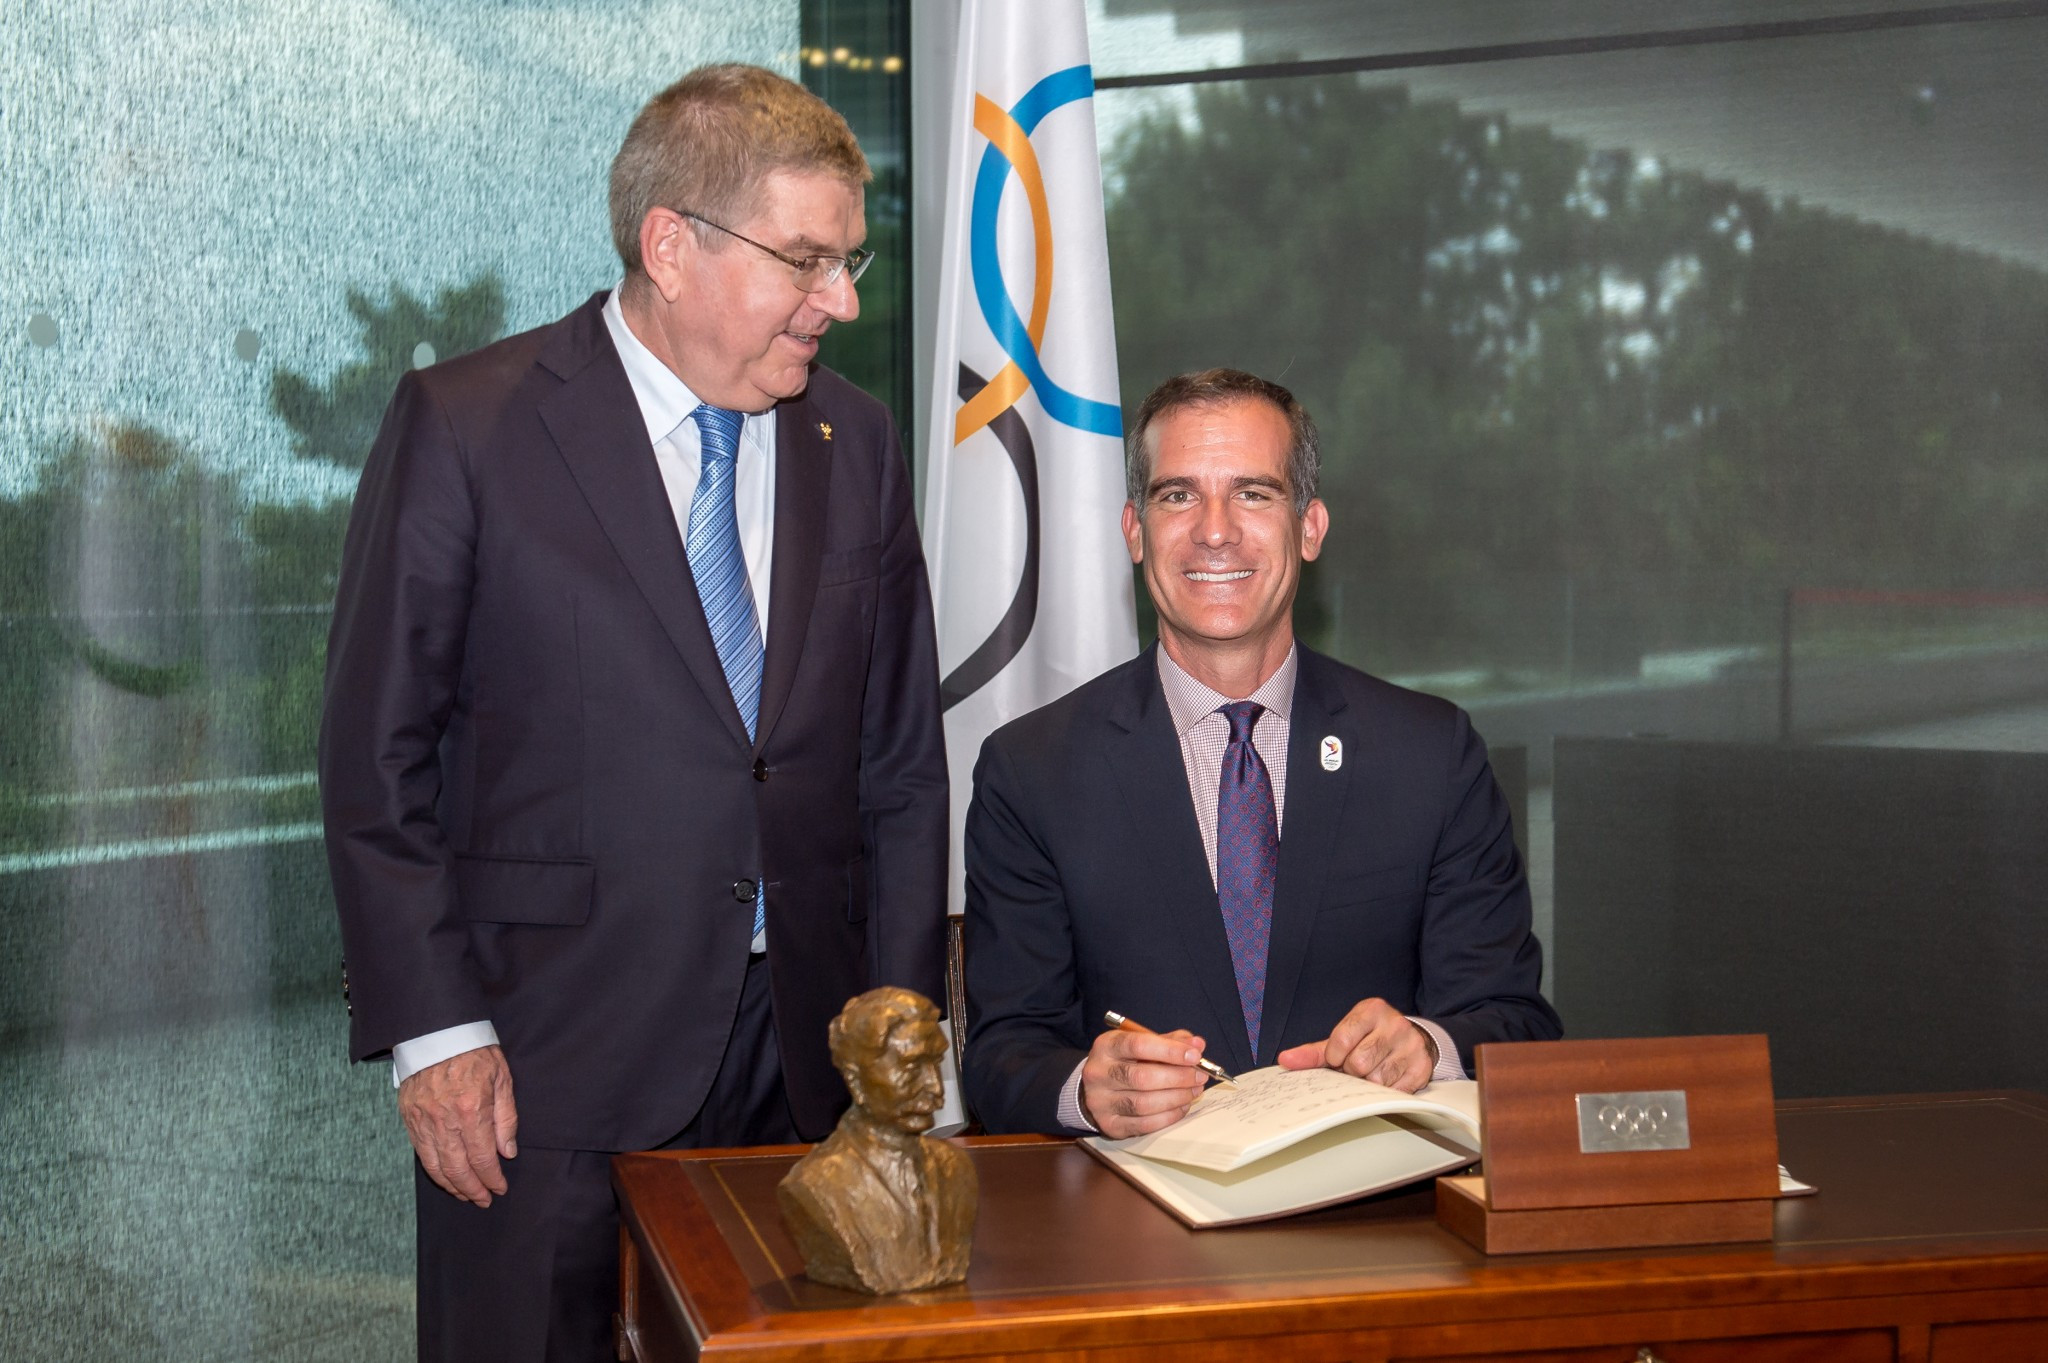 Negotiations took place between the IOC-led Thomas Bach and the Eric Garcetti spearheaded Los Angeles bid ©Getty Images